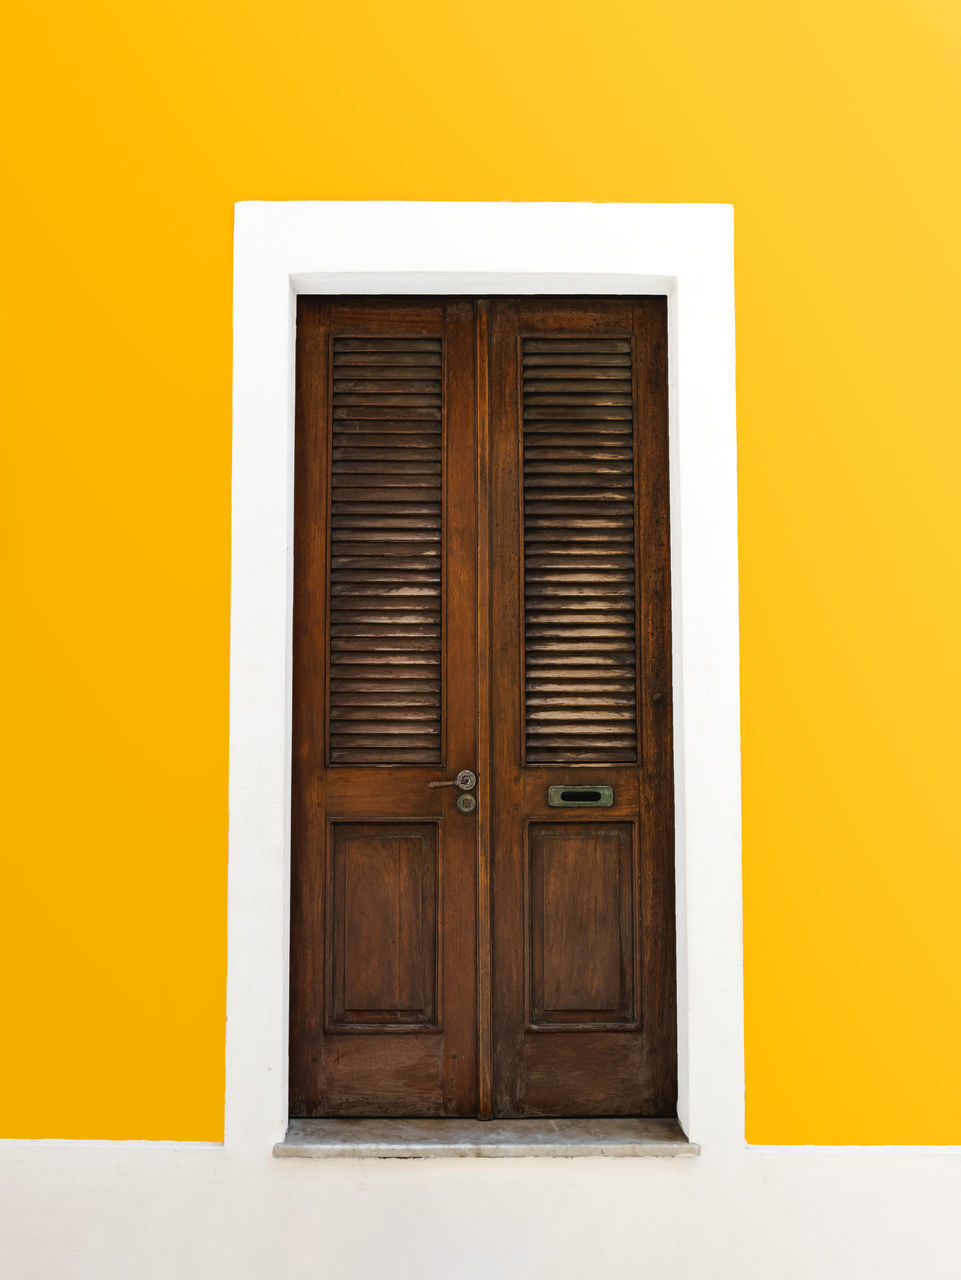 architecture, door, entrance, closed, building exterior, yellow, built structure, building, house, wood, no people, protection, security, residential district, wall - building feature, window, copy space, front door, outdoors, day, facade